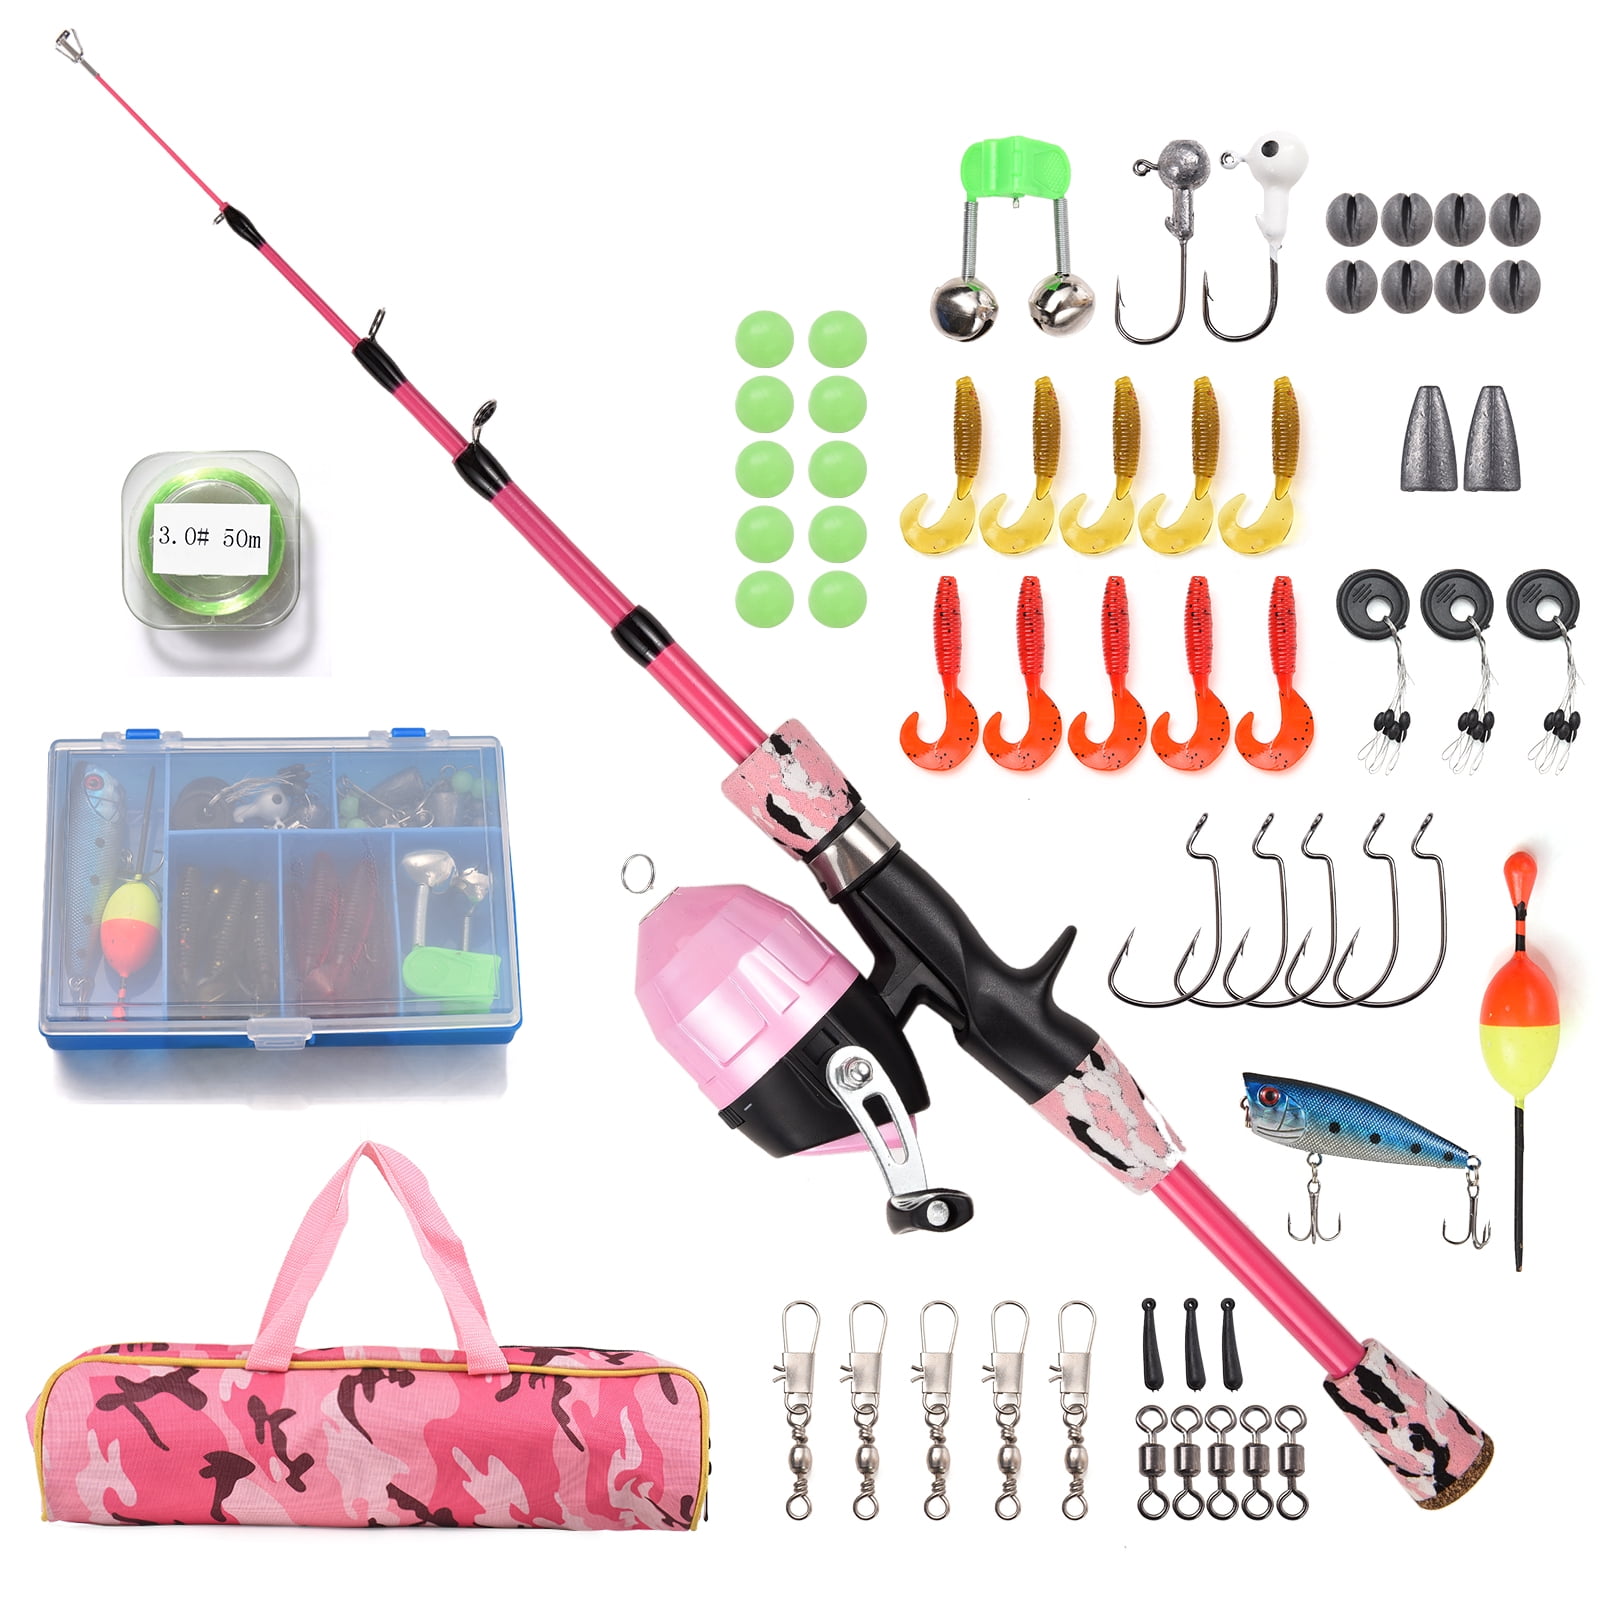 Andoer Telescopic Fishing Rod and Reel Combo Full Kit Lightweight and  Portable, Perfect for Kids and Beginners 